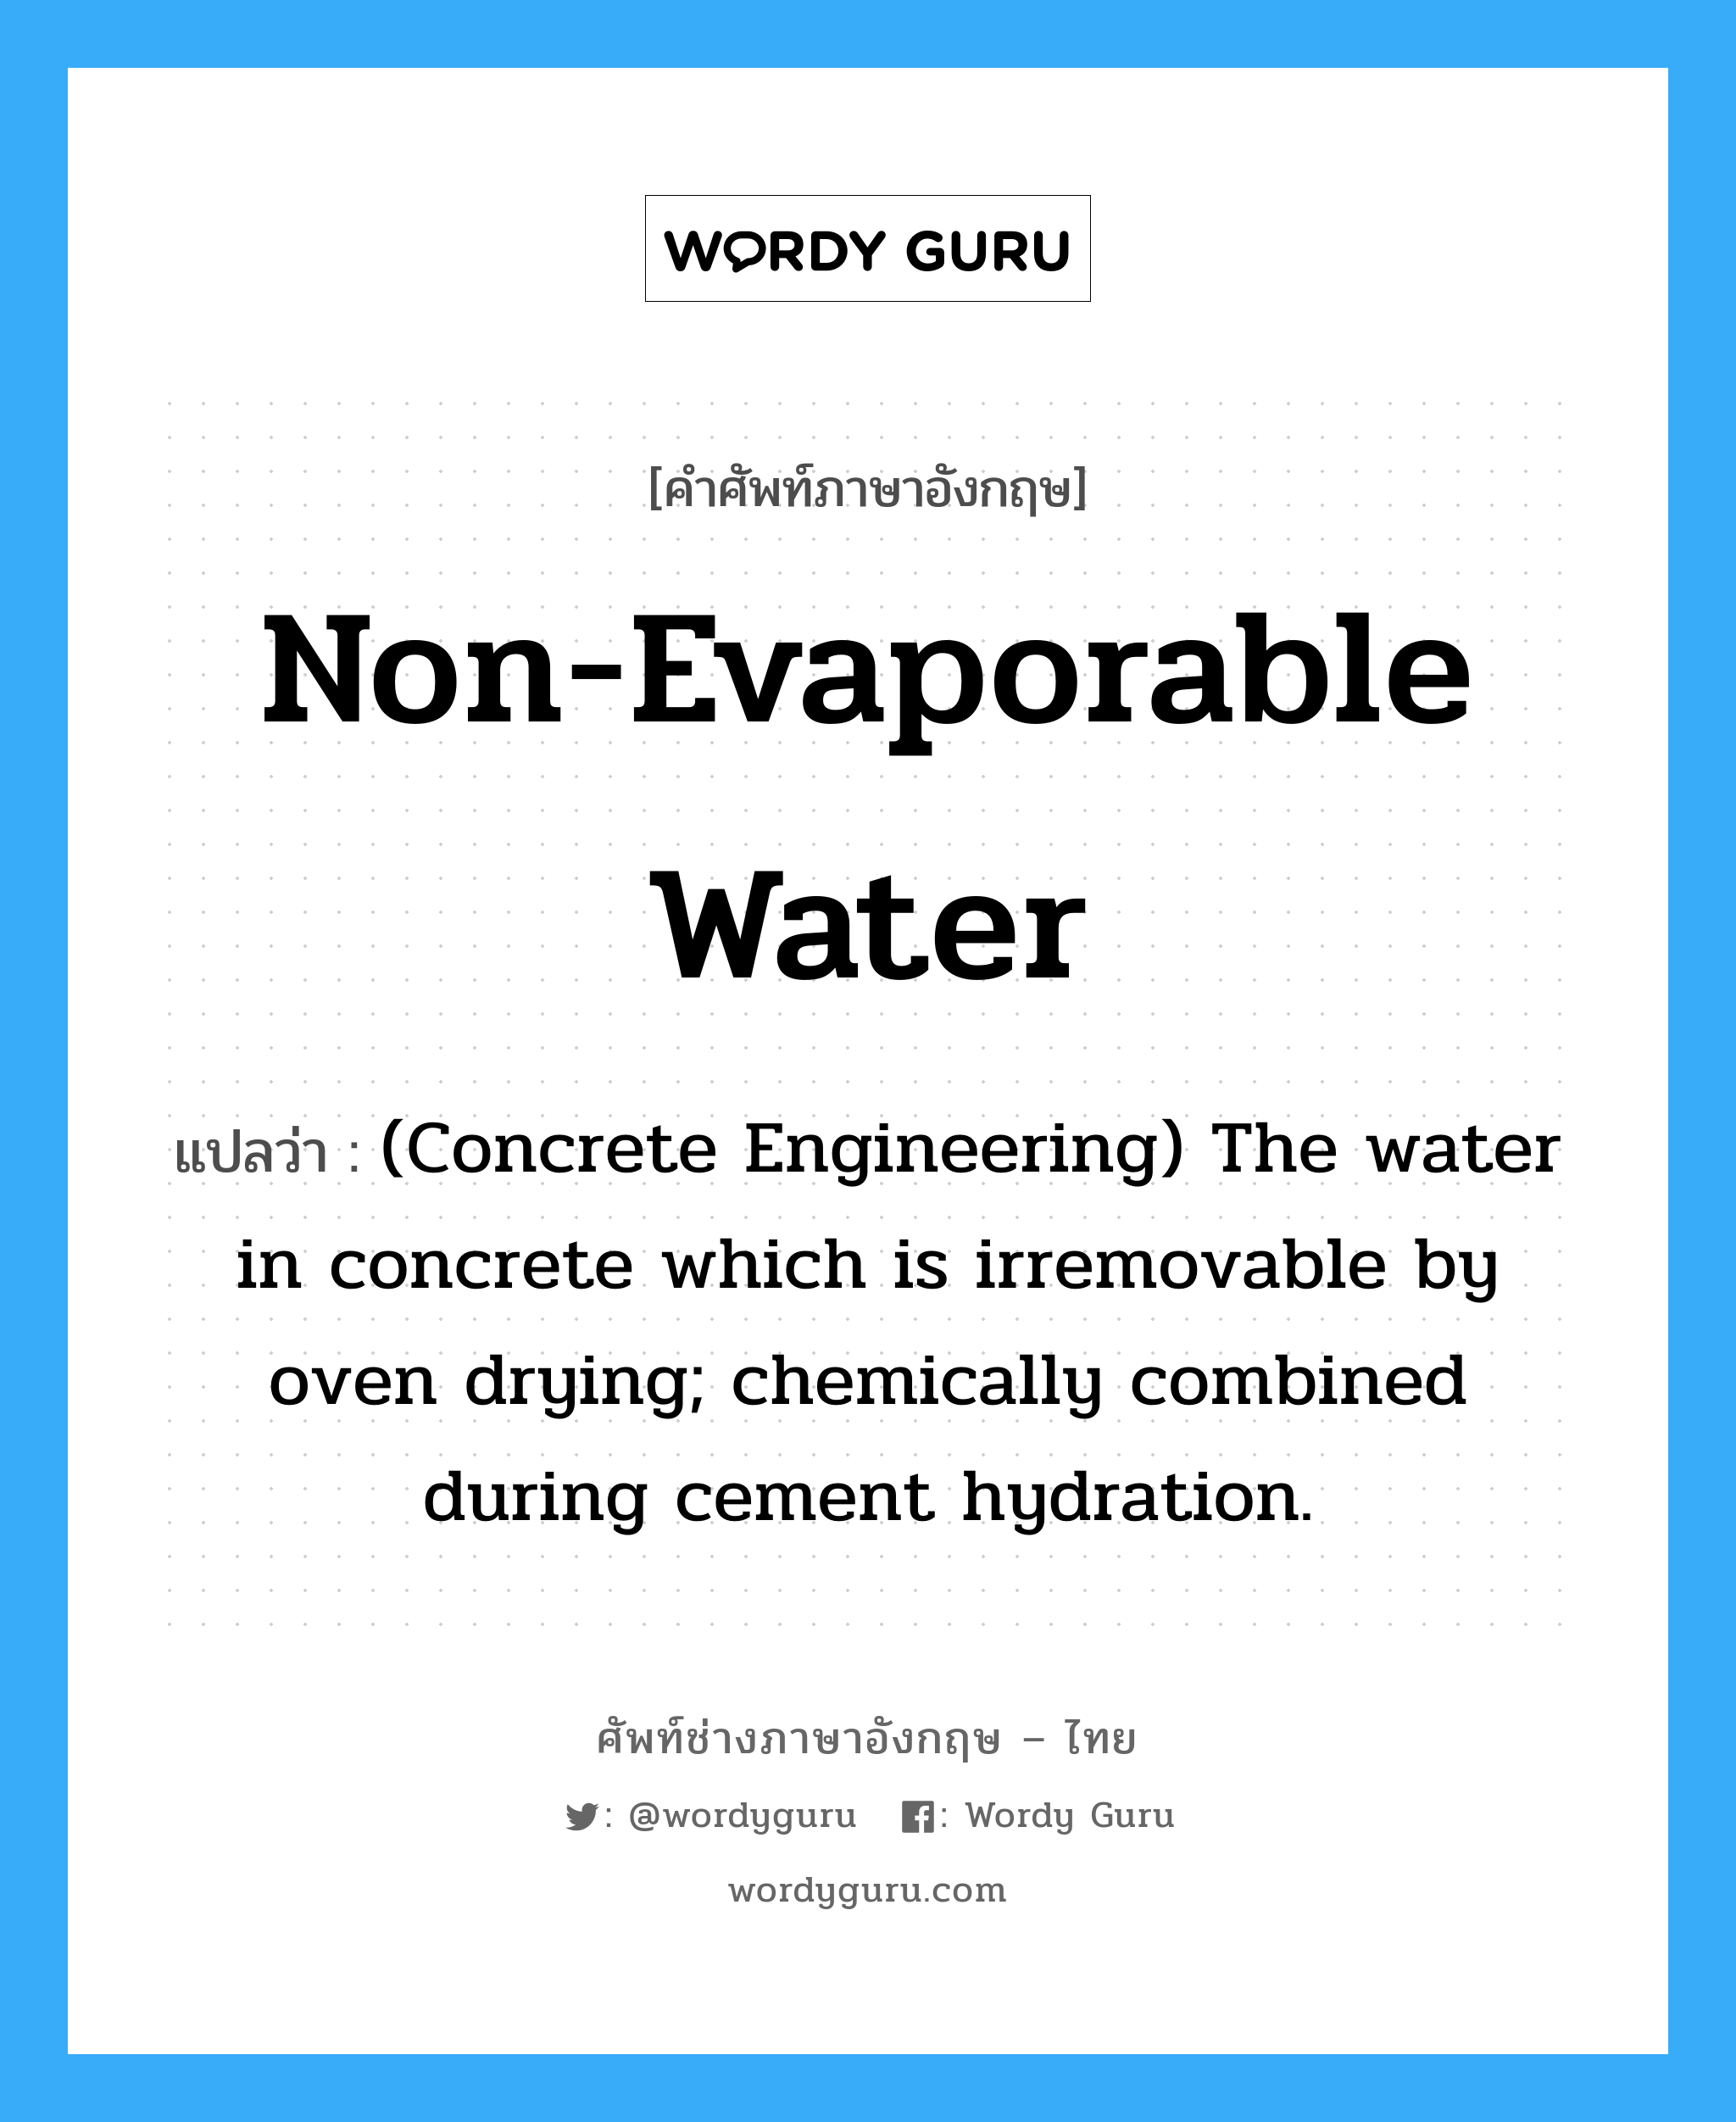 Non-evaporable Water แปลว่า?, คำศัพท์ช่างภาษาอังกฤษ - ไทย Non-evaporable Water คำศัพท์ภาษาอังกฤษ Non-evaporable Water แปลว่า (Concrete Engineering) The water in concrete which is irremovable by oven drying; chemically combined during cement hydration.